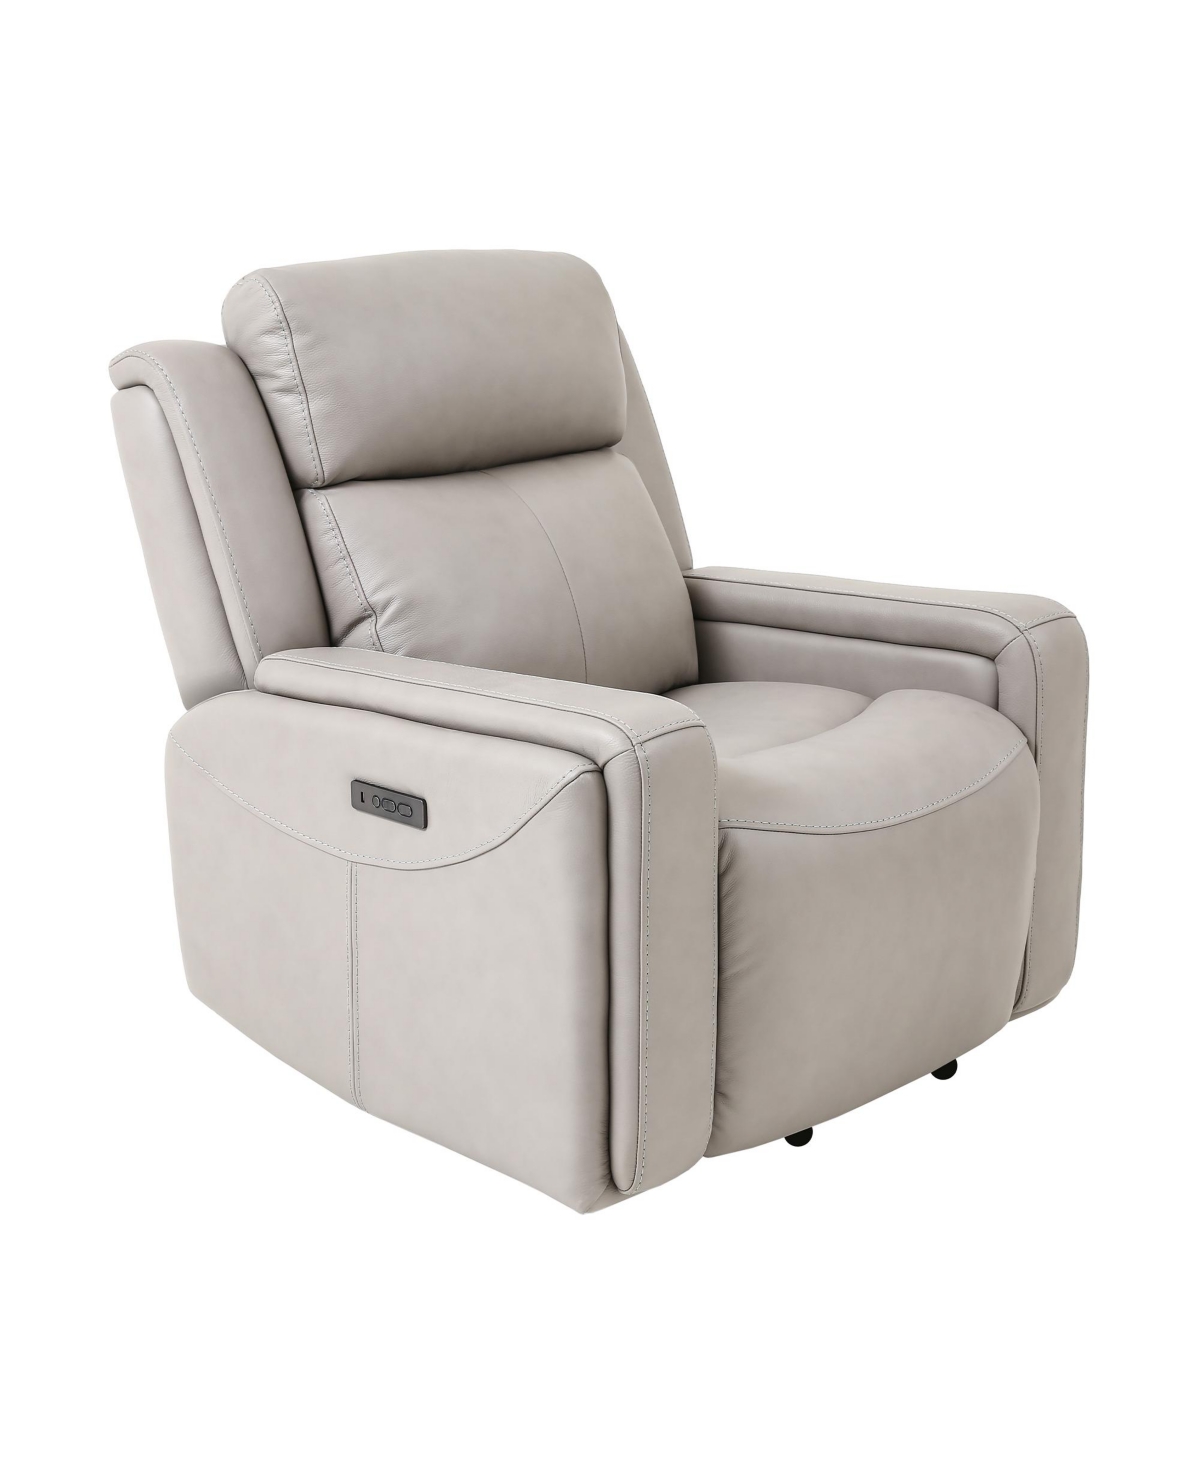 Armen Living Claude 37" Genuine Leather In Dual Power Headrest And Lumbar Support Recliner Chair In Light Gray